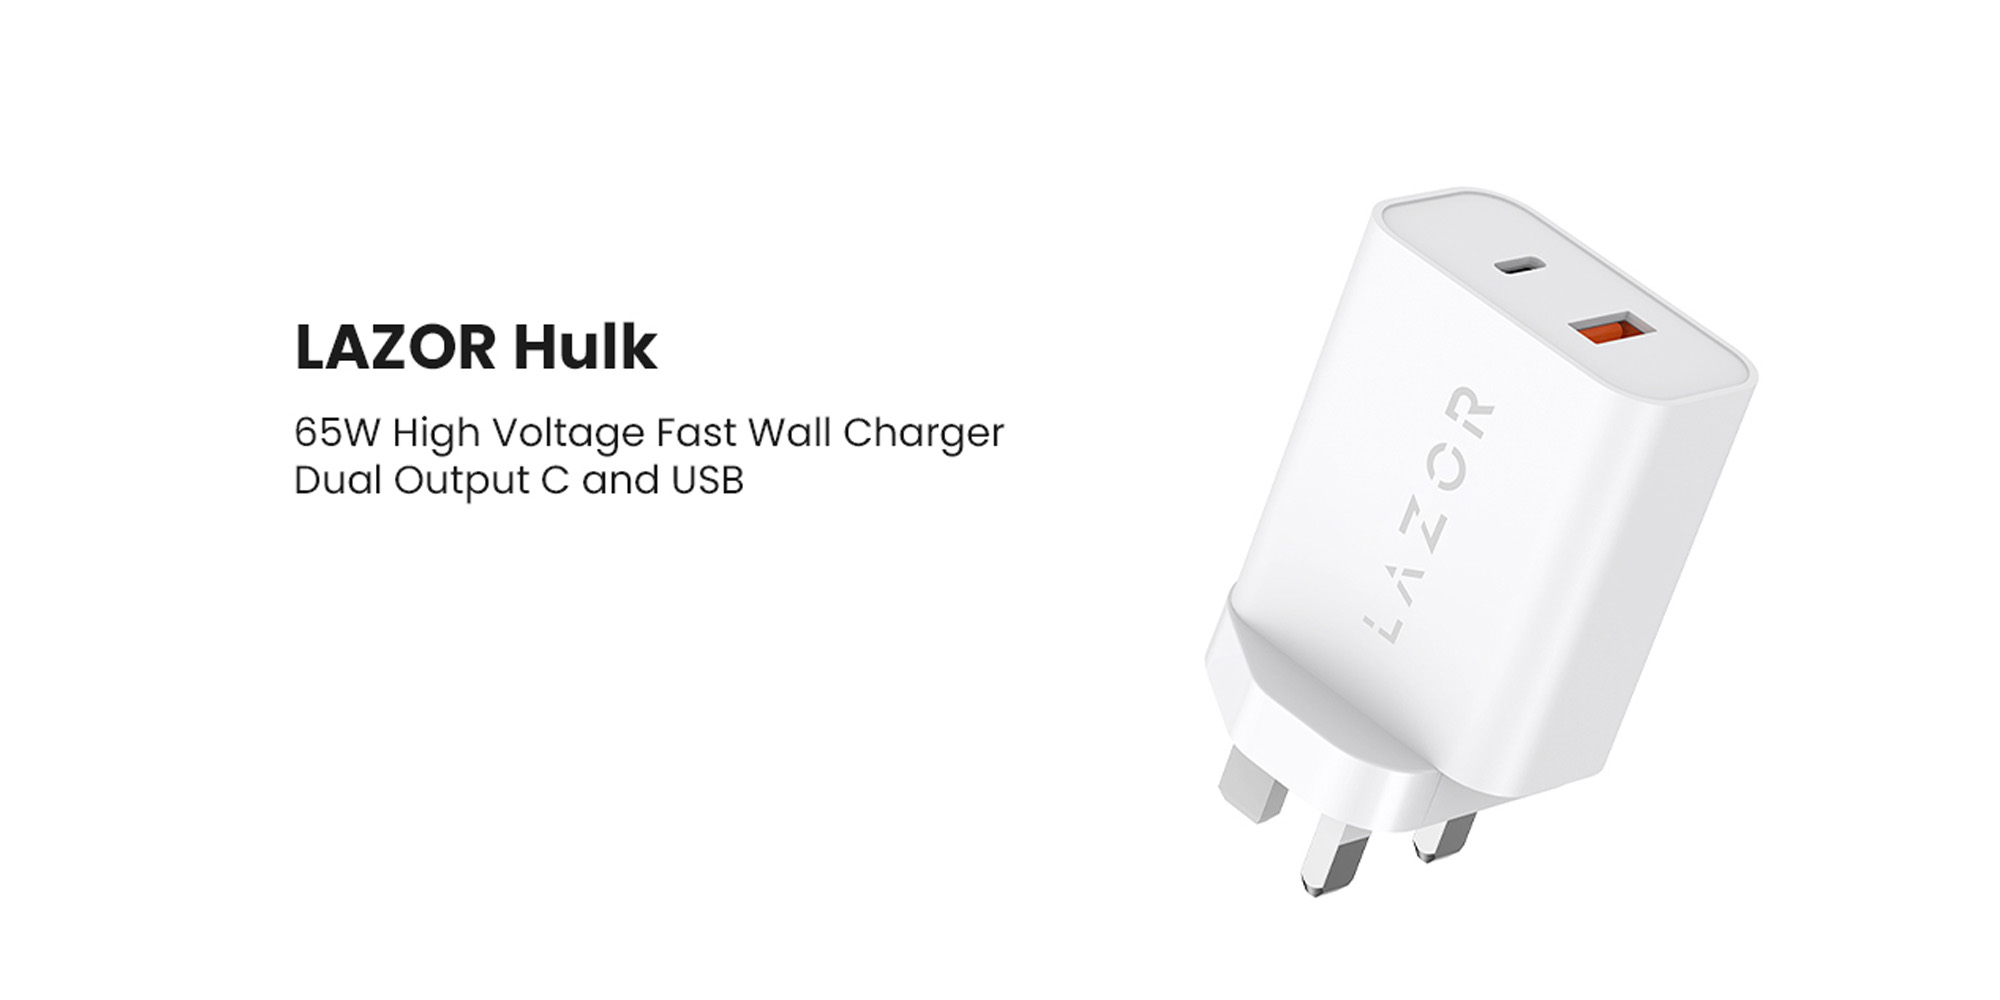 Lazor Hulk AD89: 65W Super Fast Wall Charger with Smart Identification, SCP (Self Charging Protection), QC &amp; PD Compliance, High Voltage Input, Inner Protection, USB &amp; Type-C Output - Black